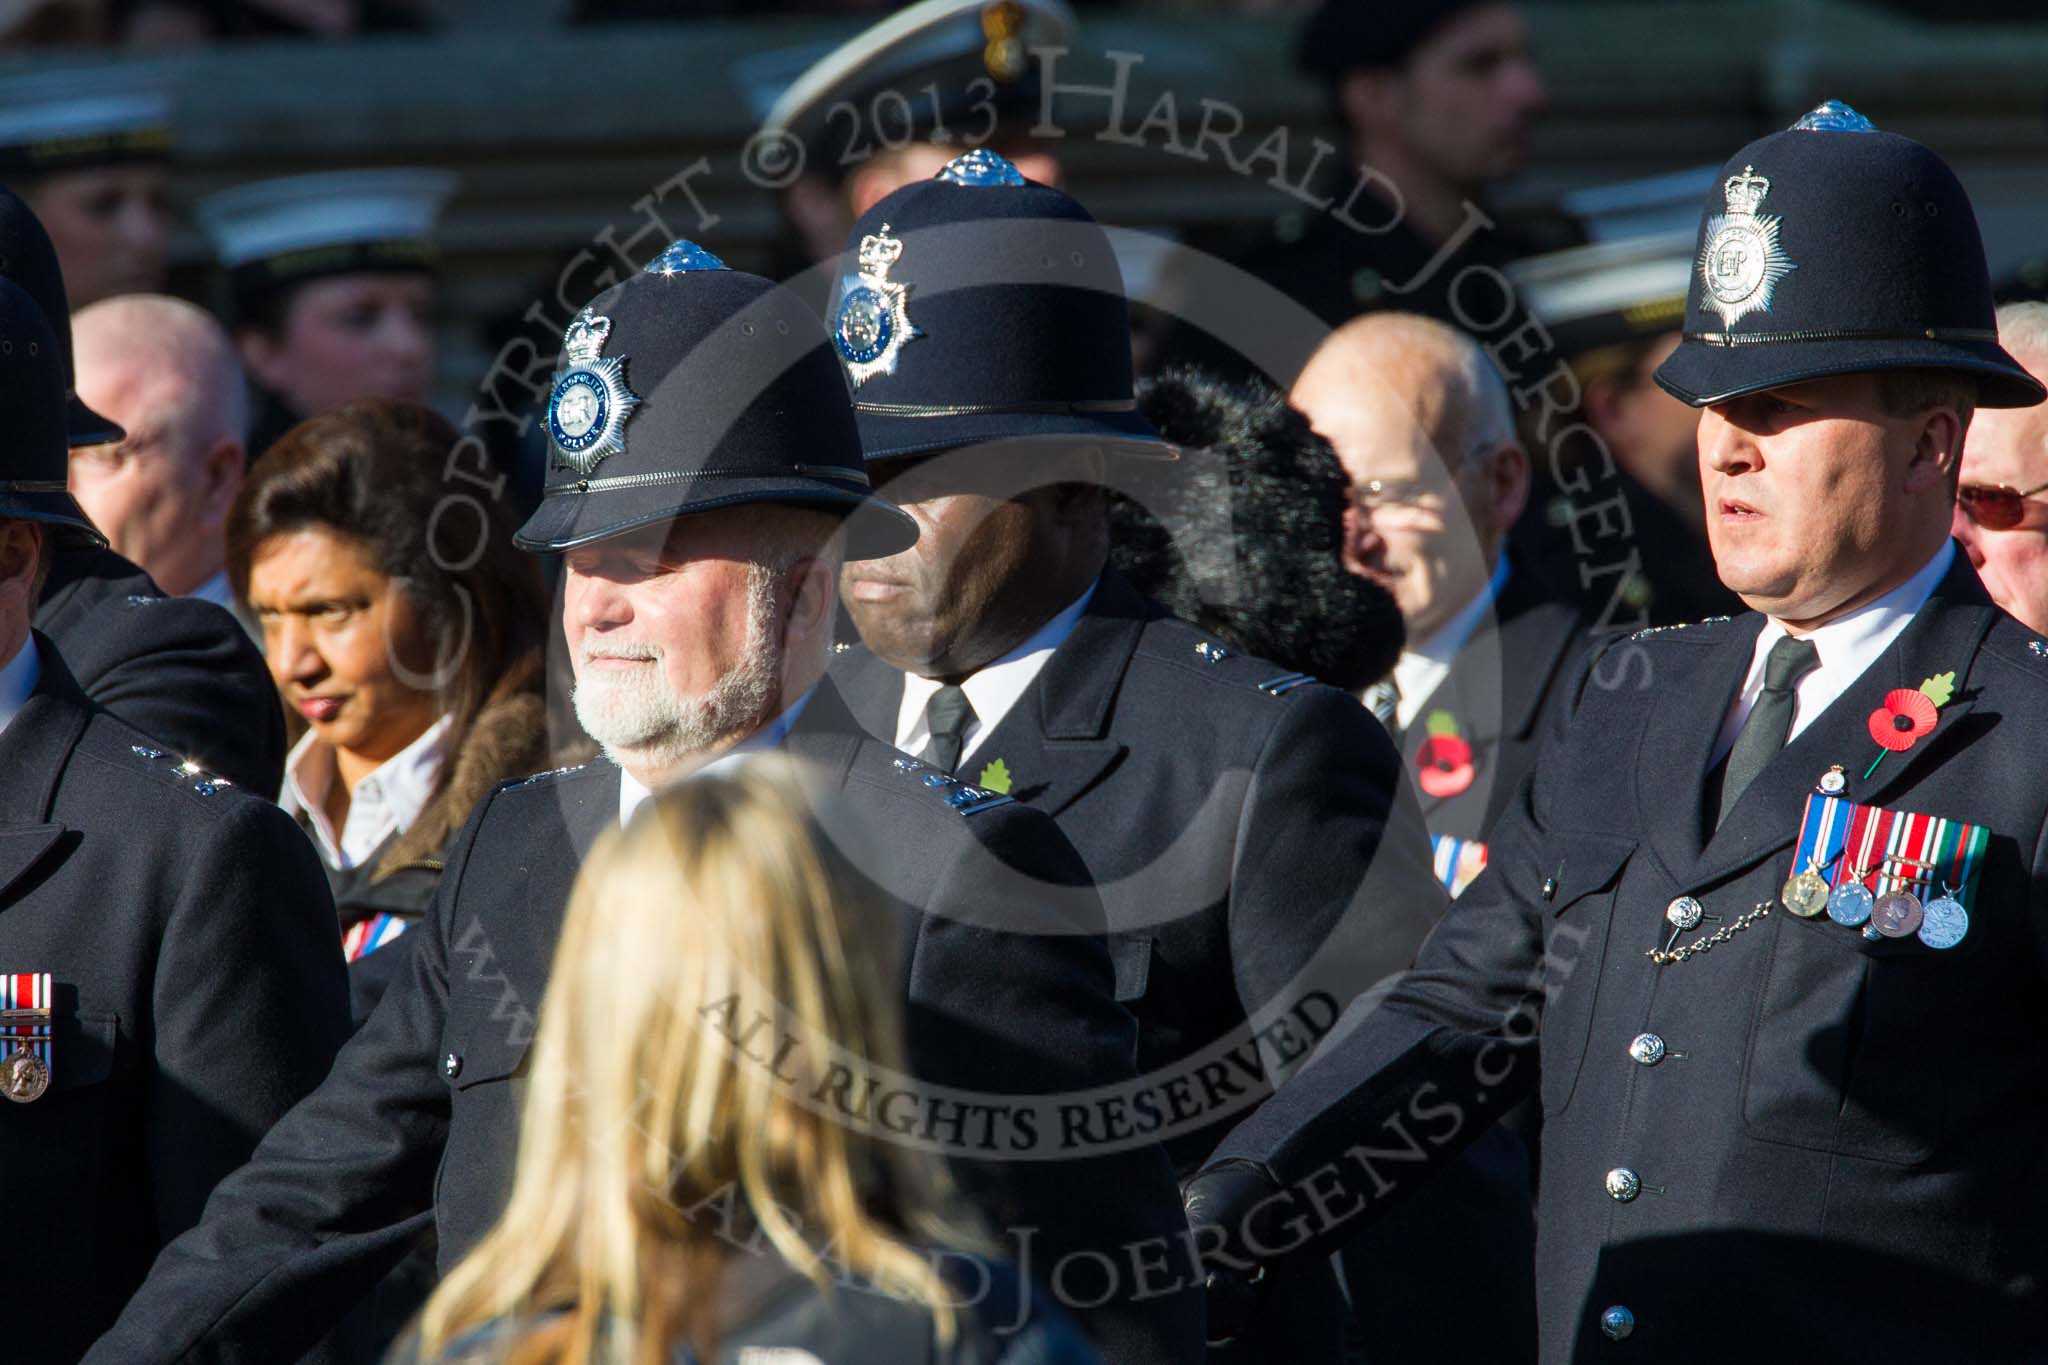 Remembrance Sunday at the Cenotaph in London 2014: Group M12 - Metropolitan Special Constabulary.
Press stand opposite the Foreign Office building, Whitehall, London SW1,
London,
Greater London,
United Kingdom,
on 09 November 2014 at 12:16, image #2065